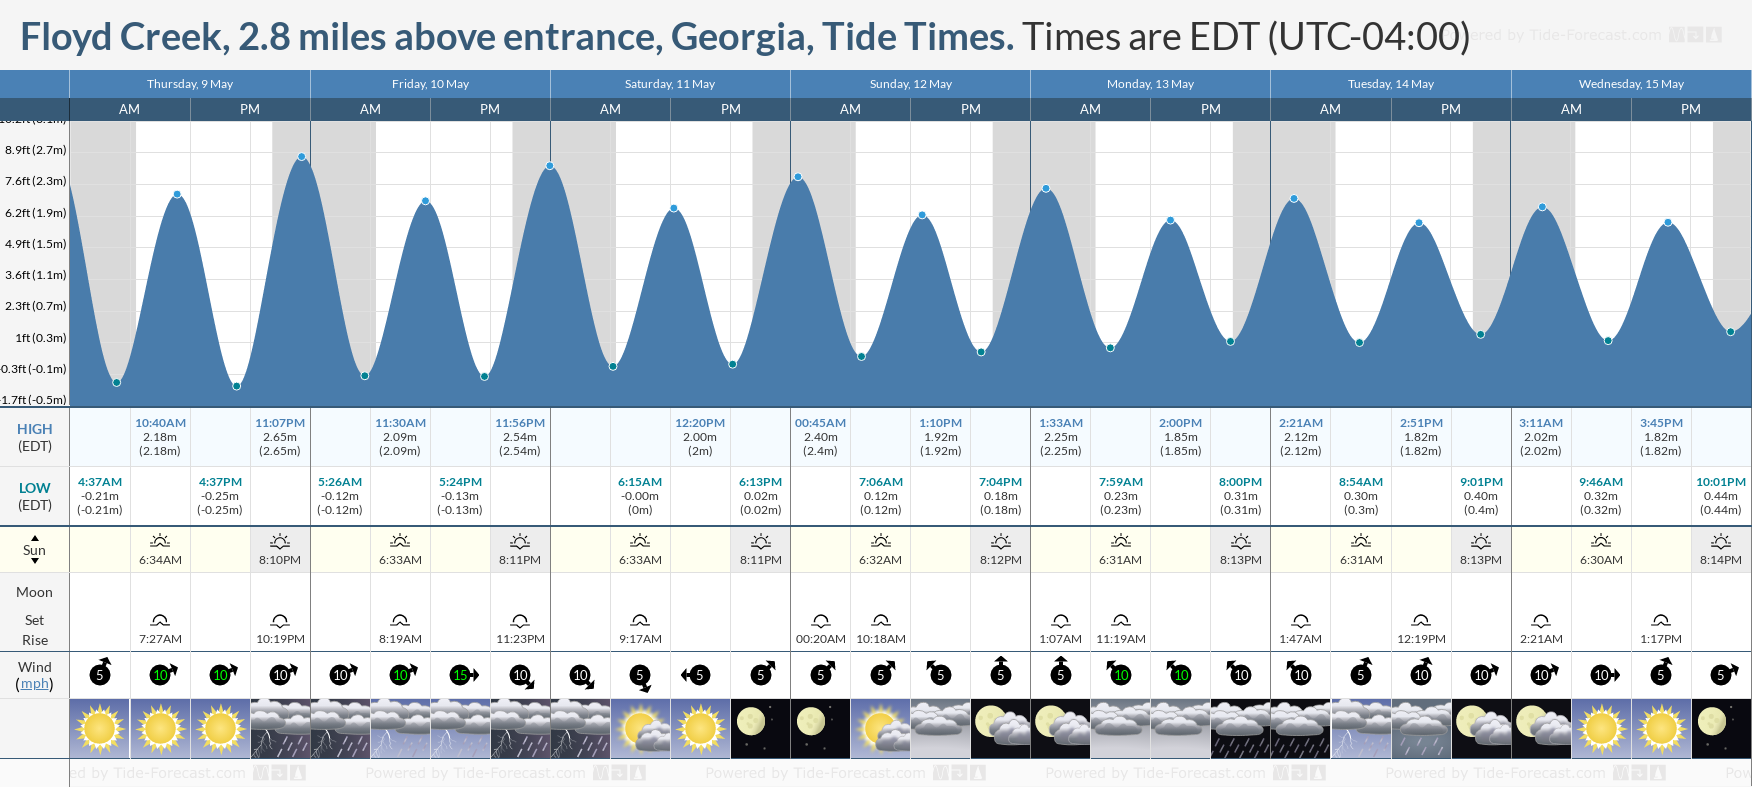 Floyd Creek, 2.8 miles above entrance, Georgia Tide Chart including high and low tide times for the next 7 days